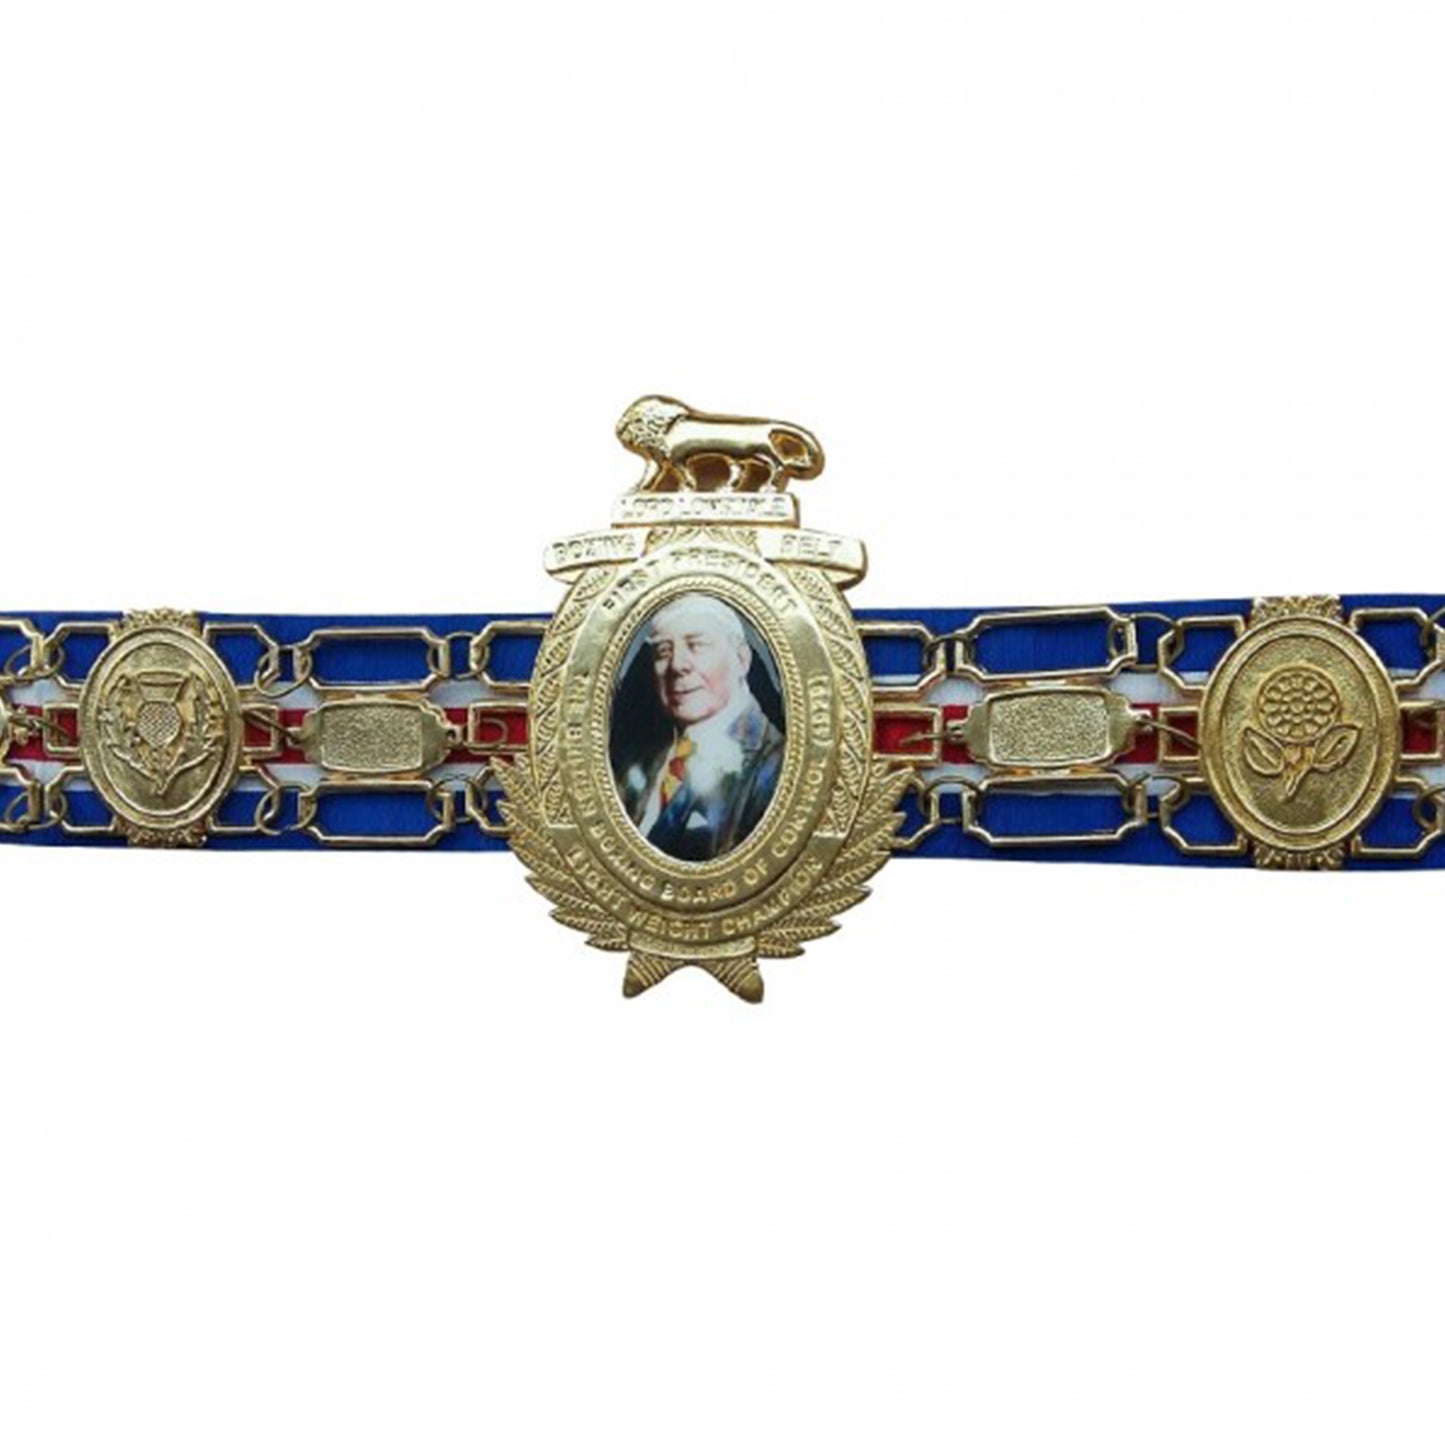 LORD LONSDALE BOXING CHAMPIONSHIP BELT